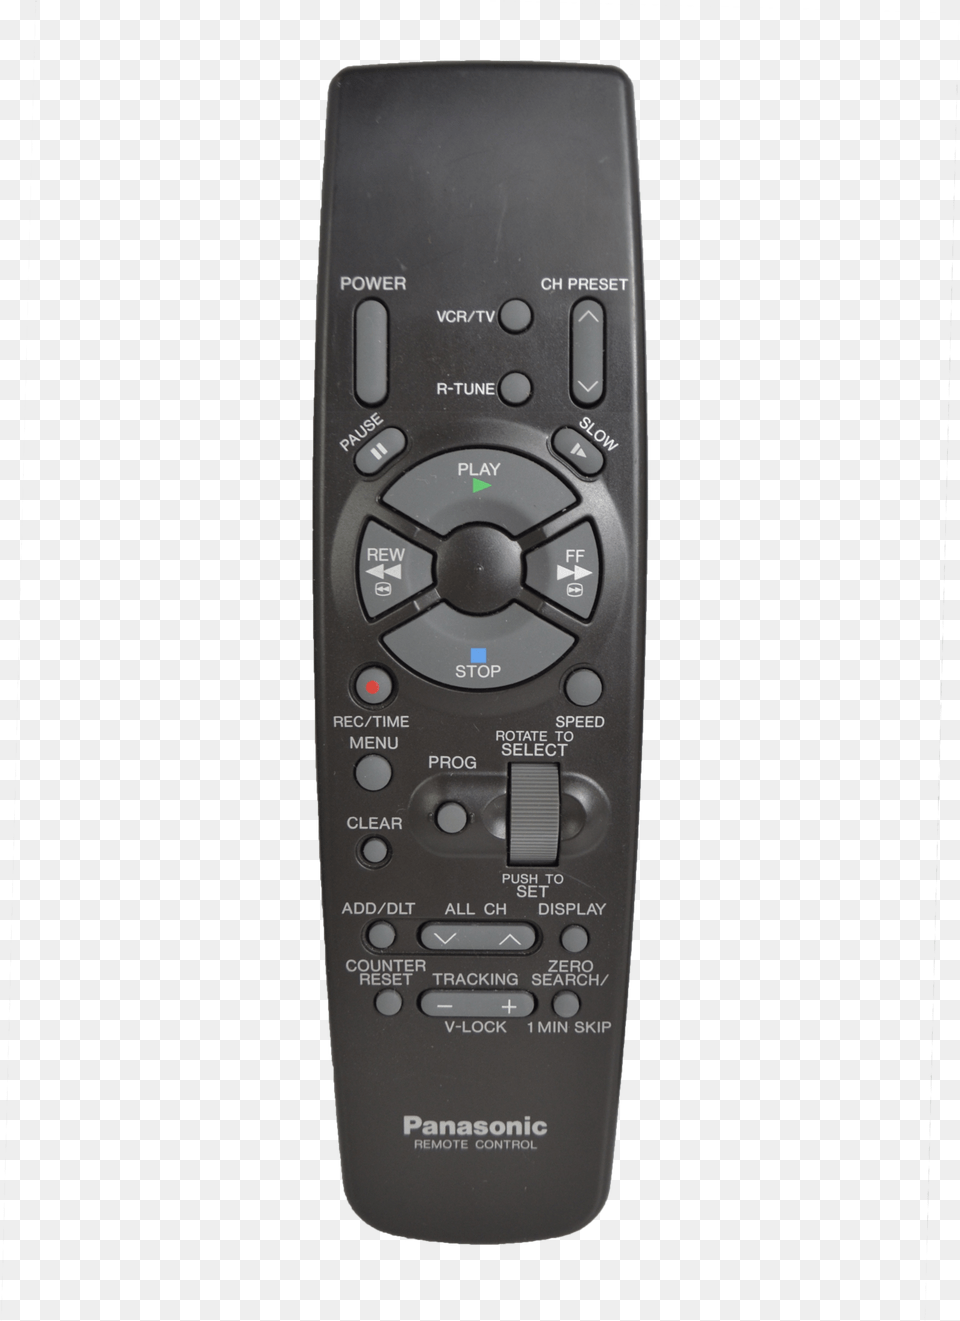 Panasonic Vsqs1337 Vcr Vhs Player Remote Control For Electronics, Remote Control Png